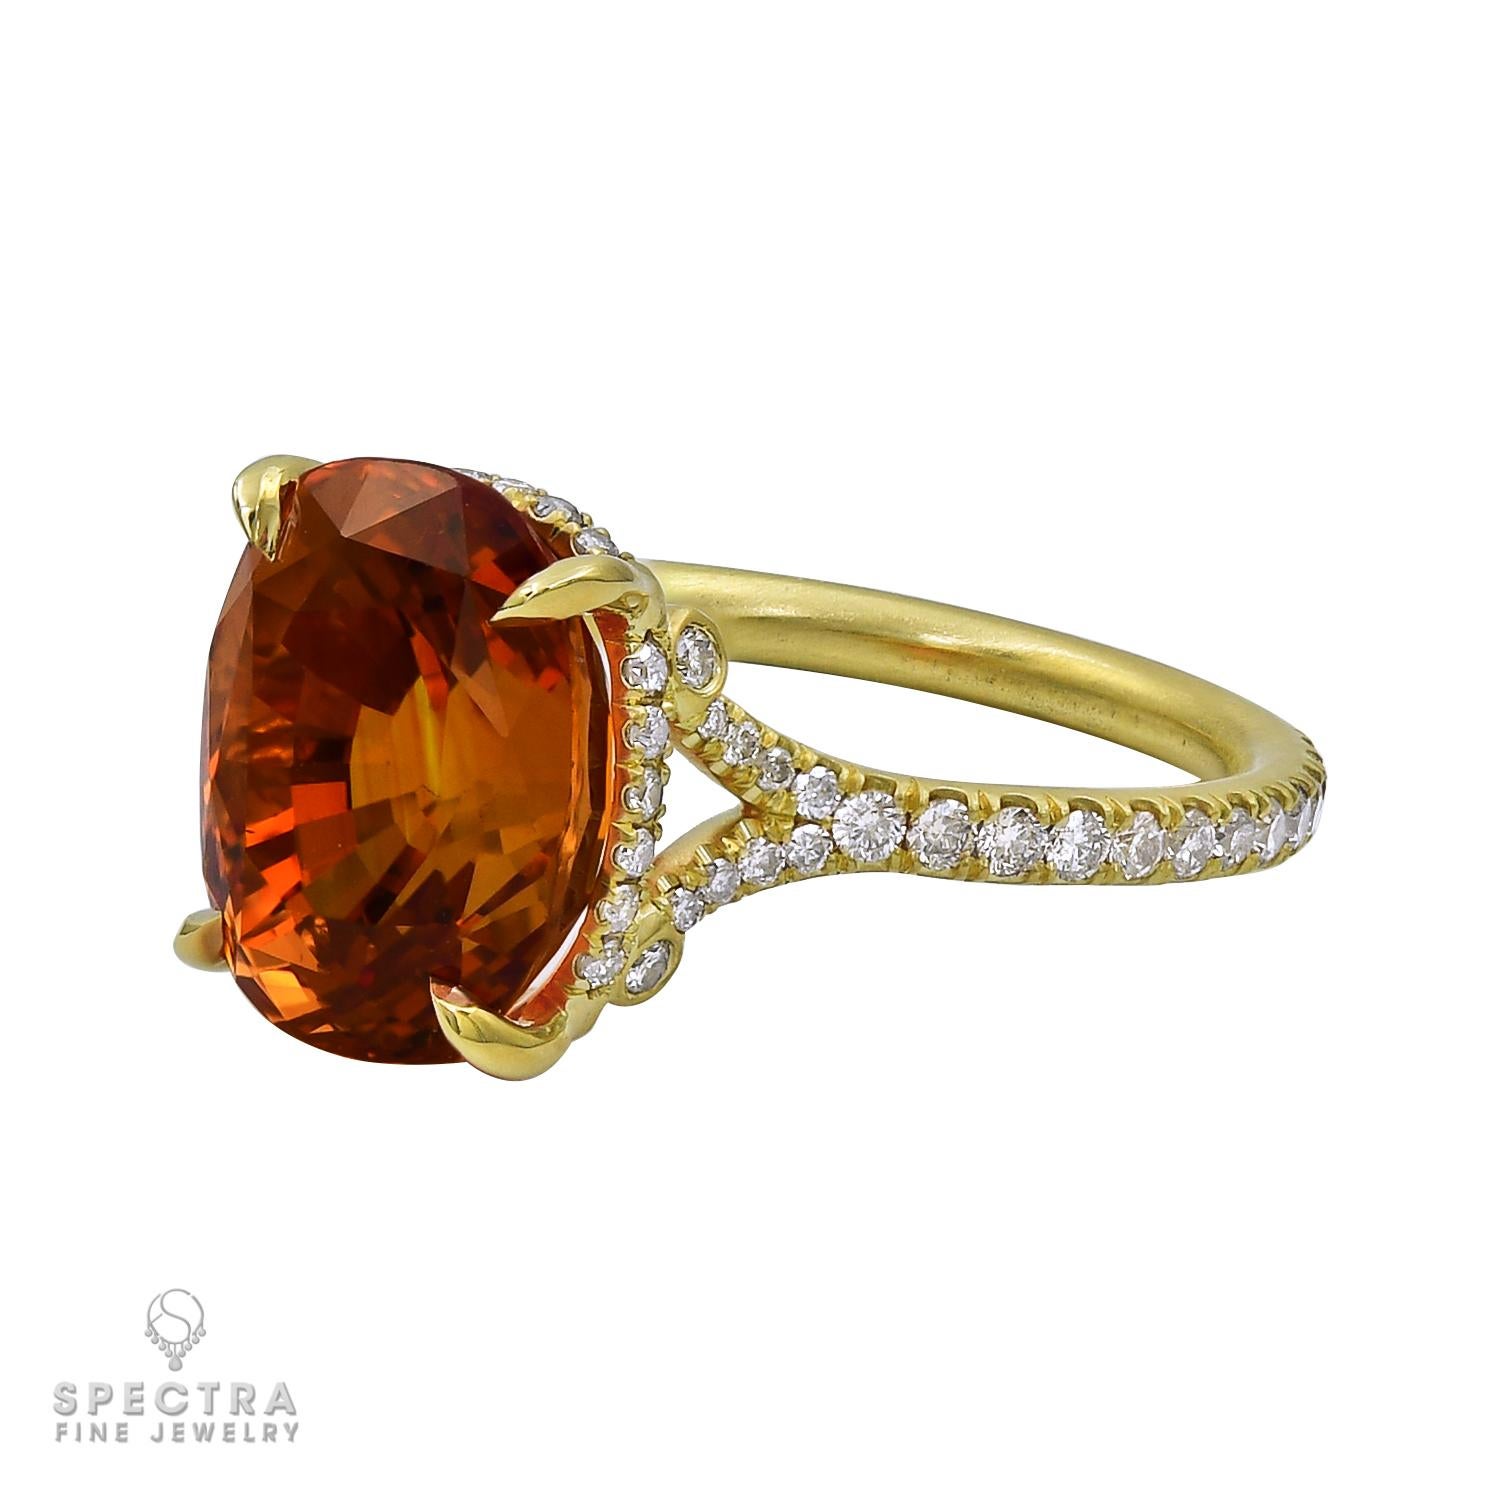 A gorgeous ring embellished with a cushion-shape sapphire of the rare orange color weighing a total of 7.88 carats.
Accompanied by the certificate from AGL, stating that it's of Sri Lankan origin with the clarity enhancement (heated).
The sapphire